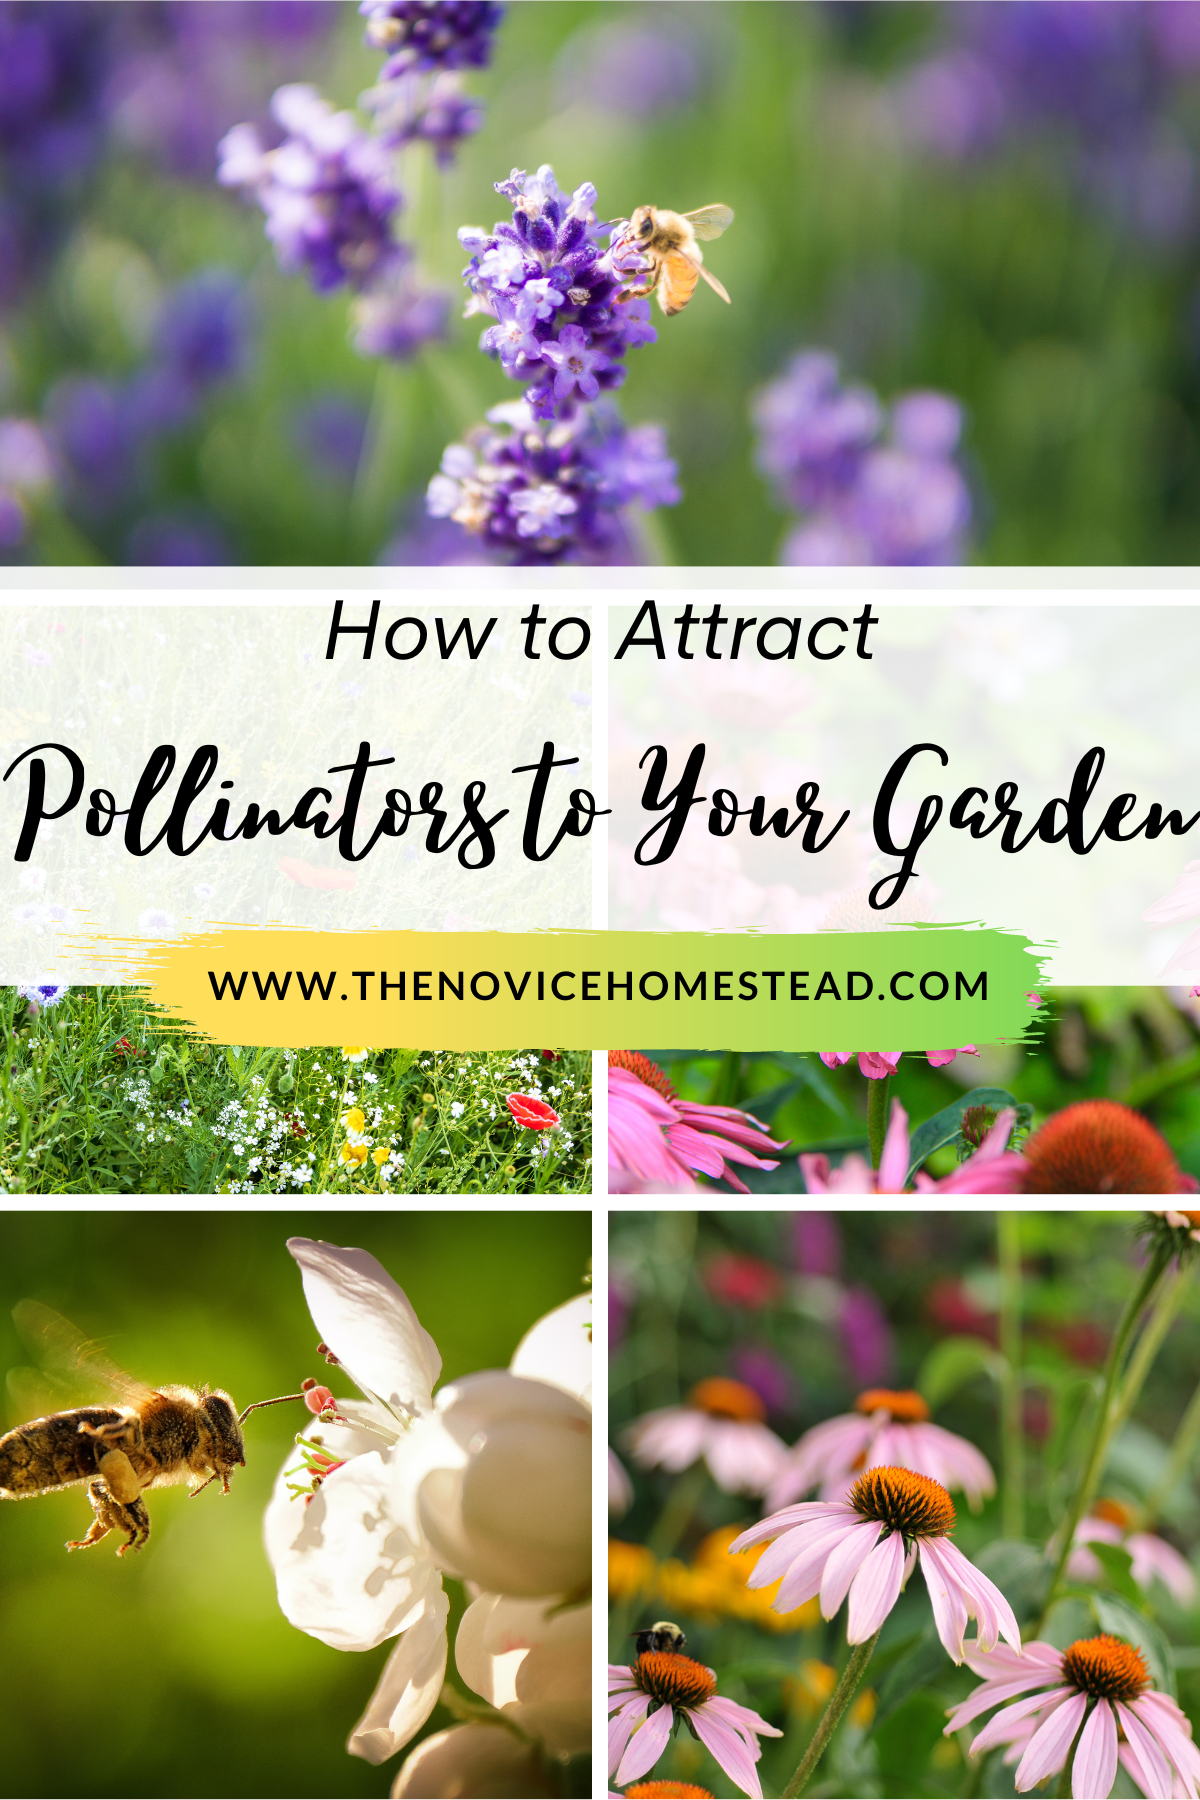 collage image of bees on flowers; text overlay "How to Attract Pollinators to Your Garden"